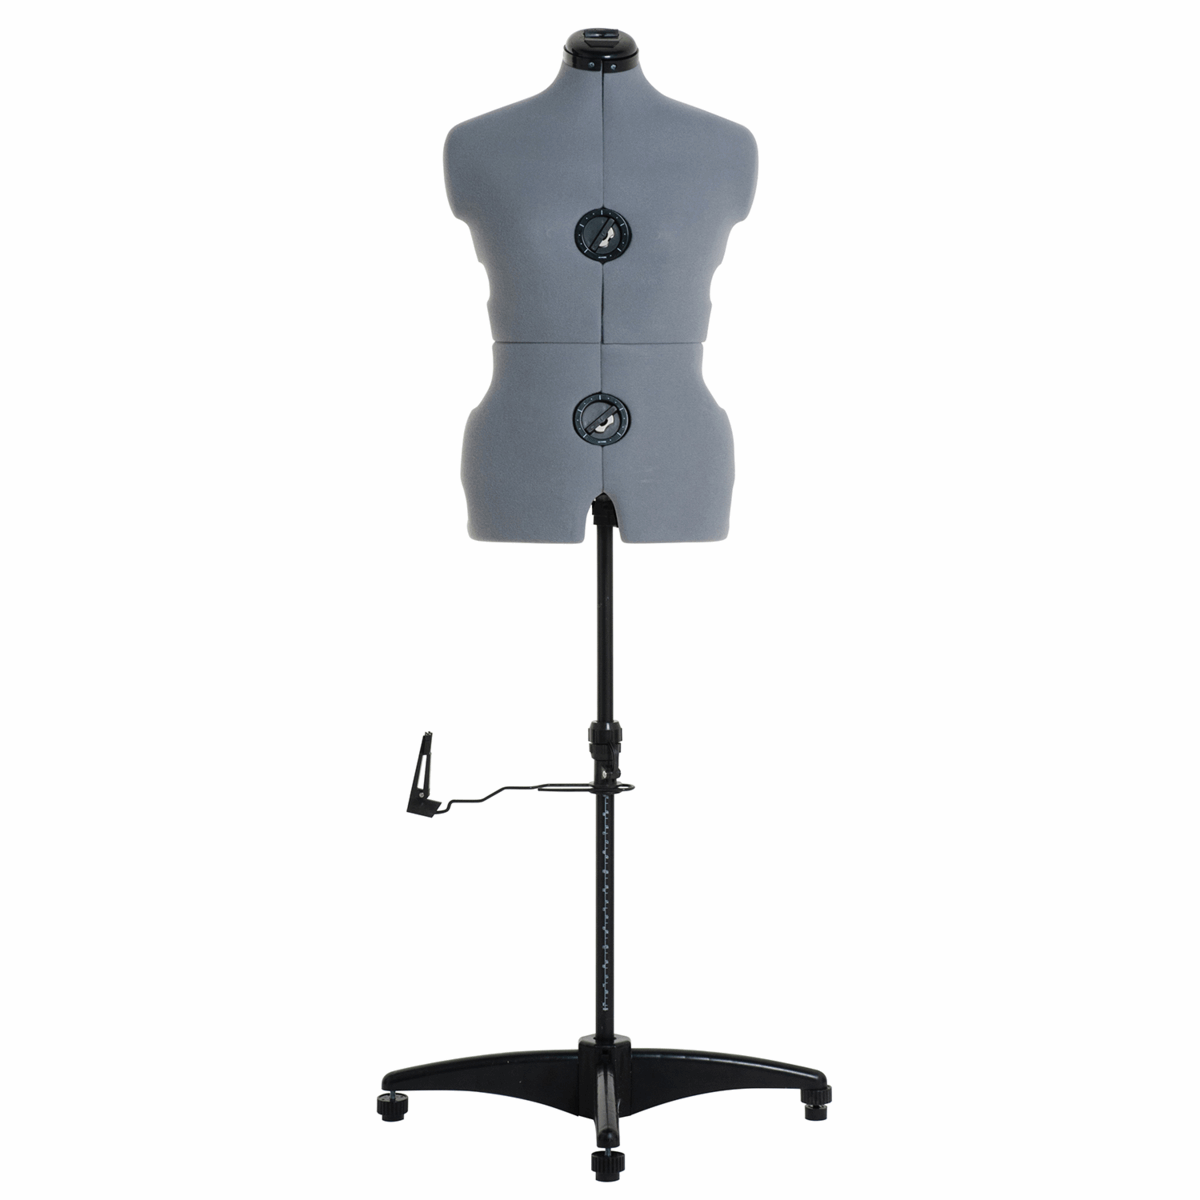 Milward Adjustable Dress Form (Grey) Deluxe with Hem Marker: Medium  - Dress size: 12-22 (Tailors Dummy / Mannequin) * Free upgrade to the Adjustoform Tailormaid at no extra cost